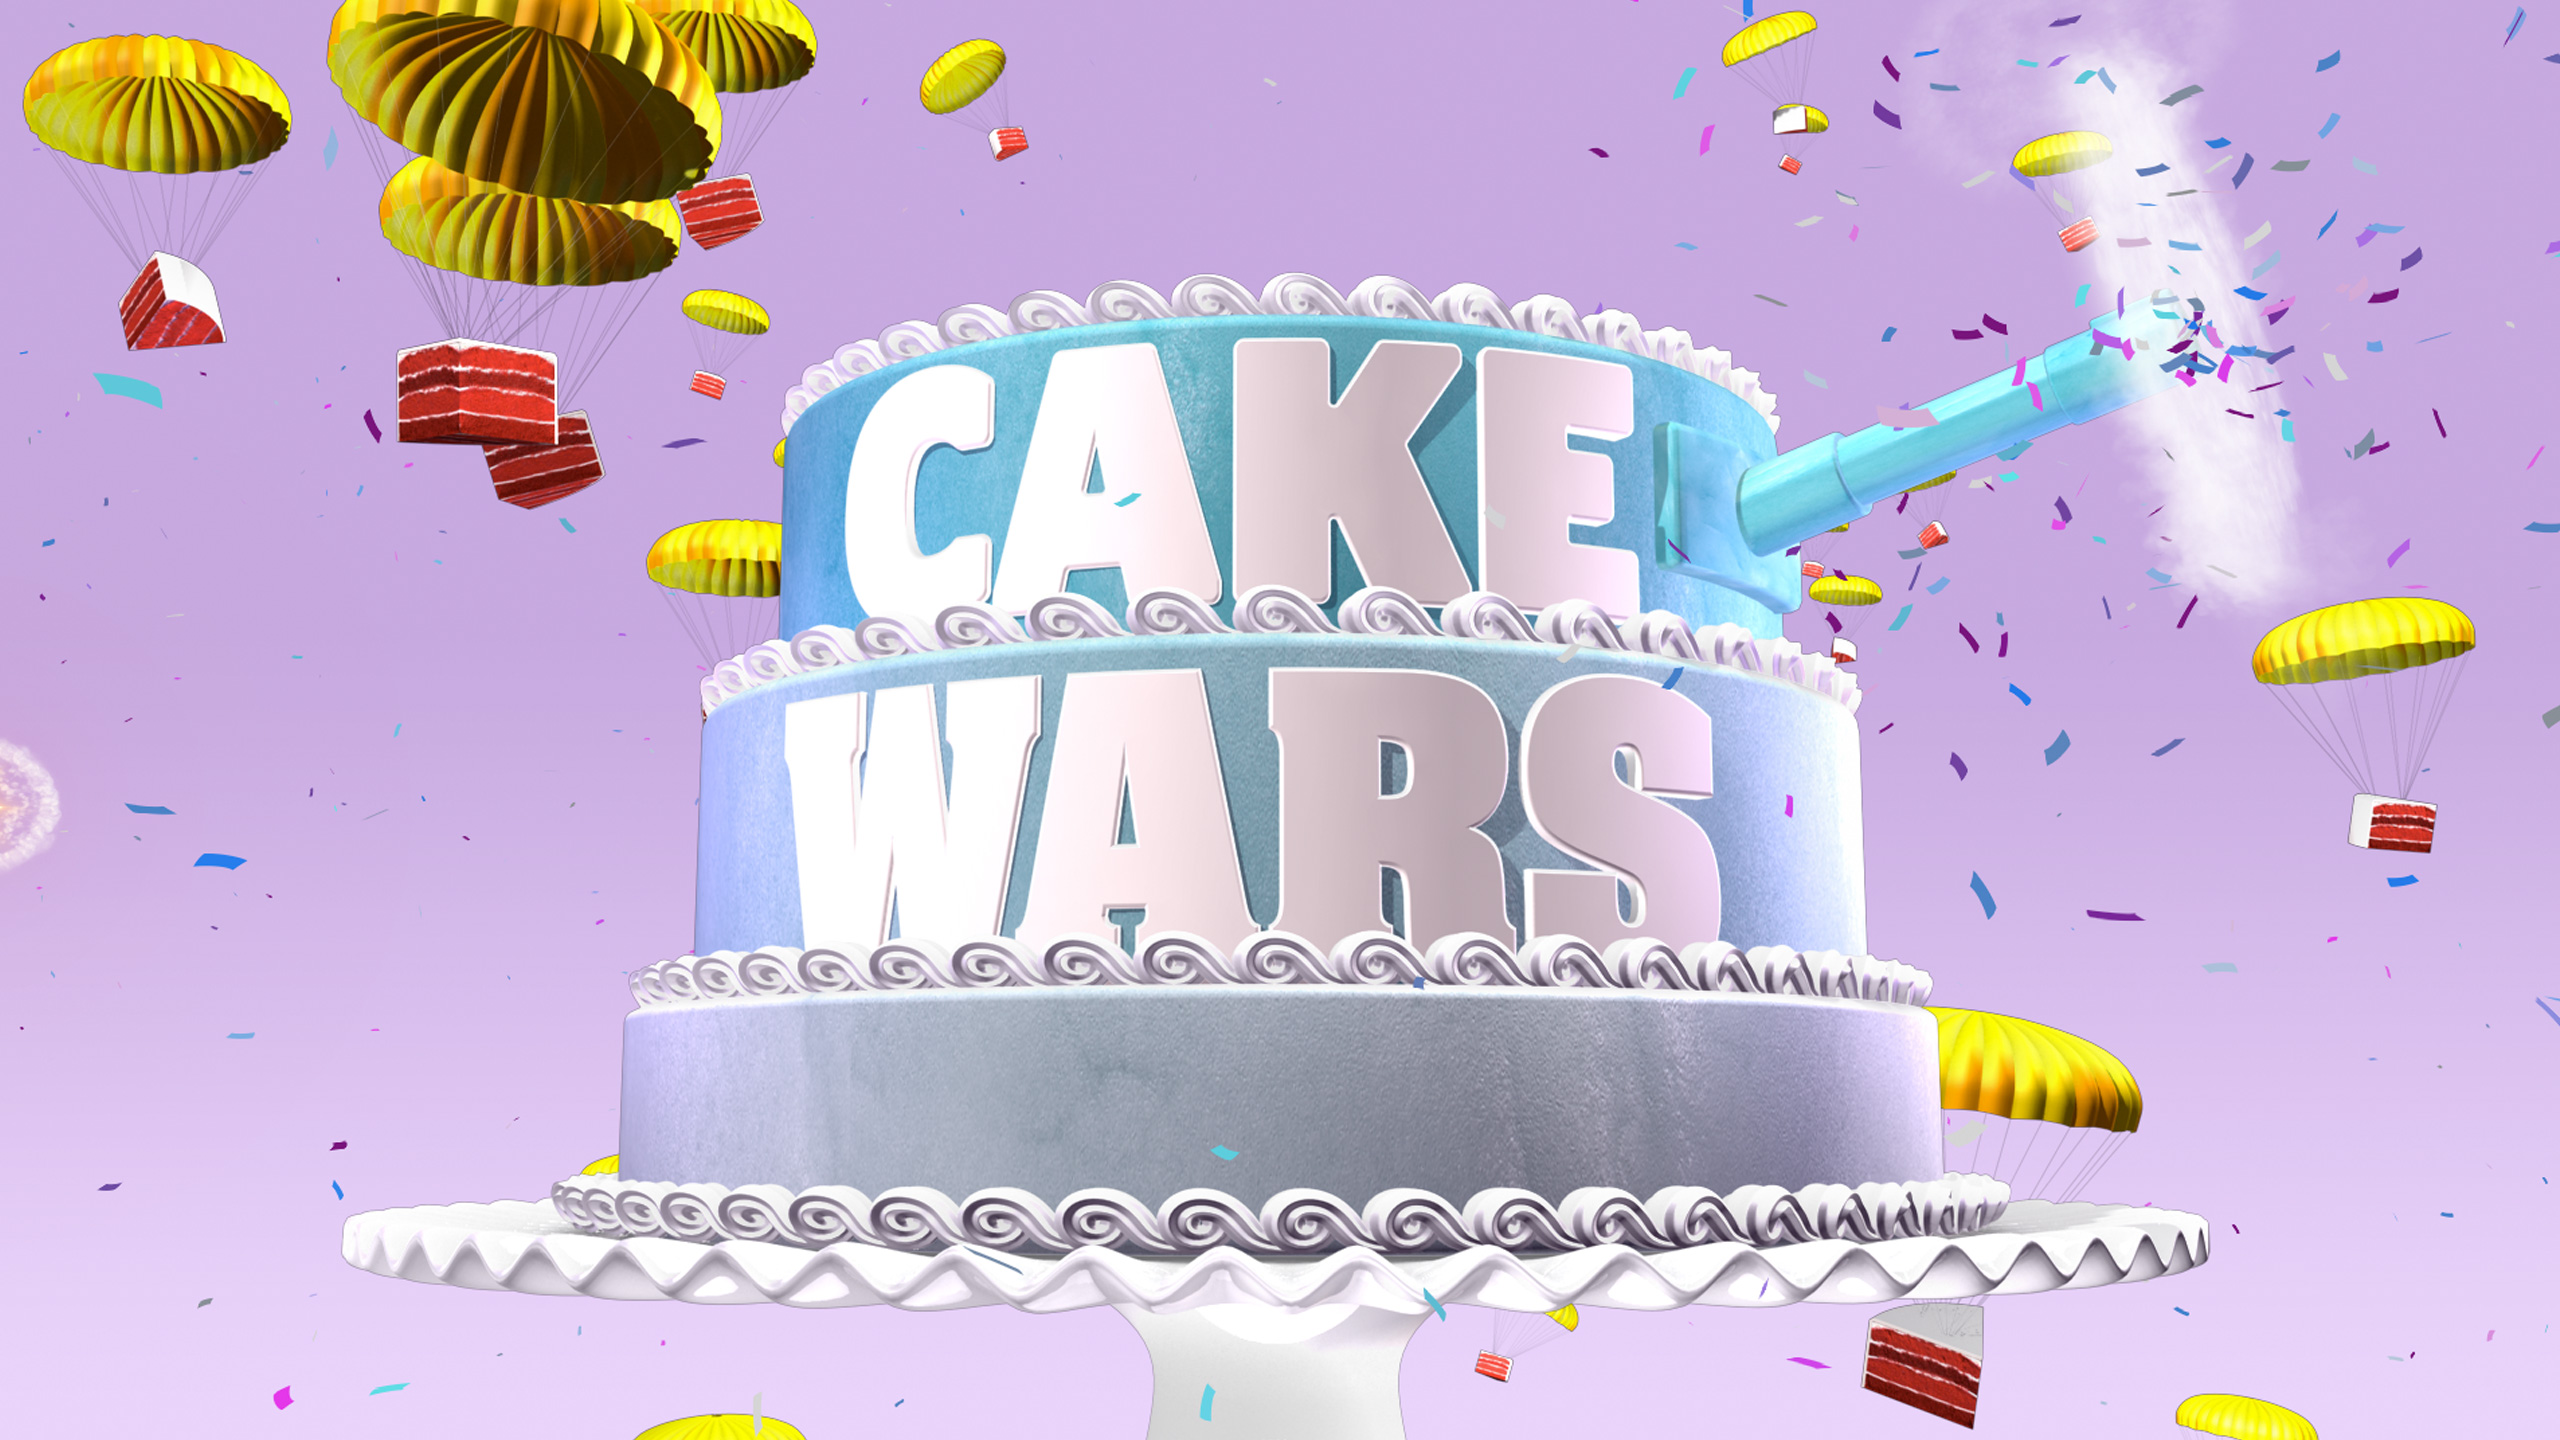 From Mean Girls to Cake Wars